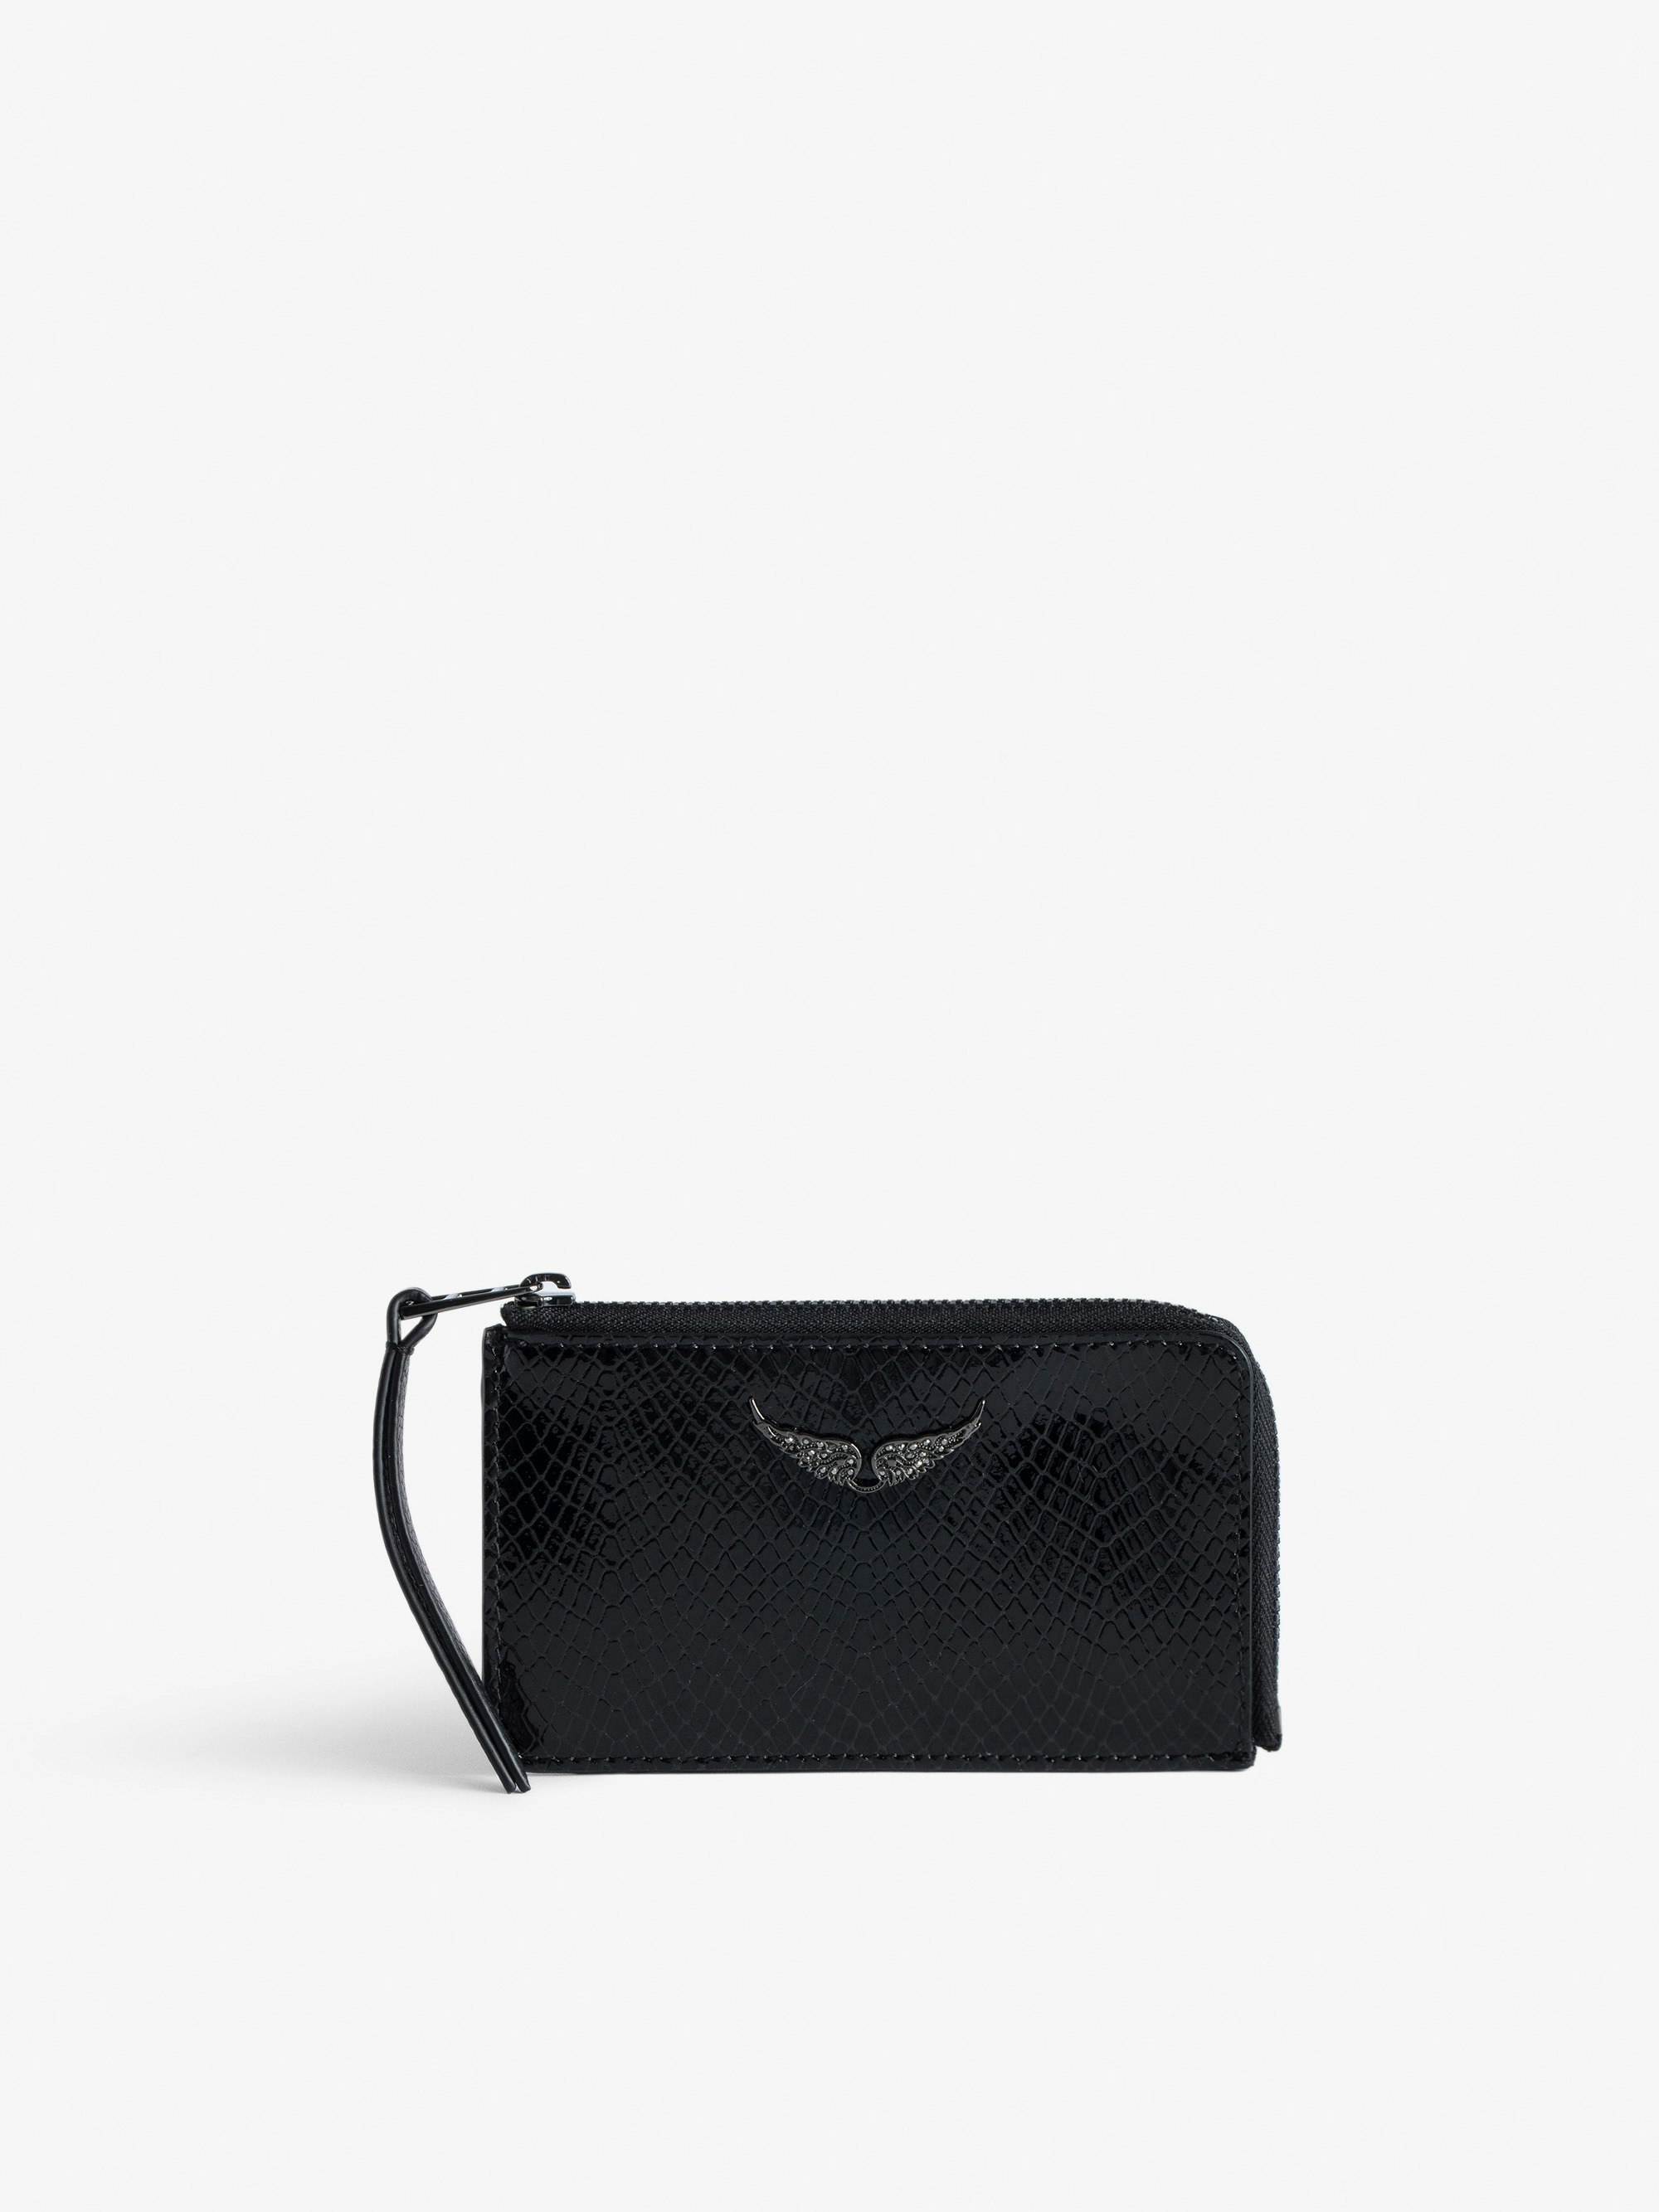 ZV Card Glossy Wild Embossed Card Holder - Women’s black python-effect patent leather card holder with wings charm.